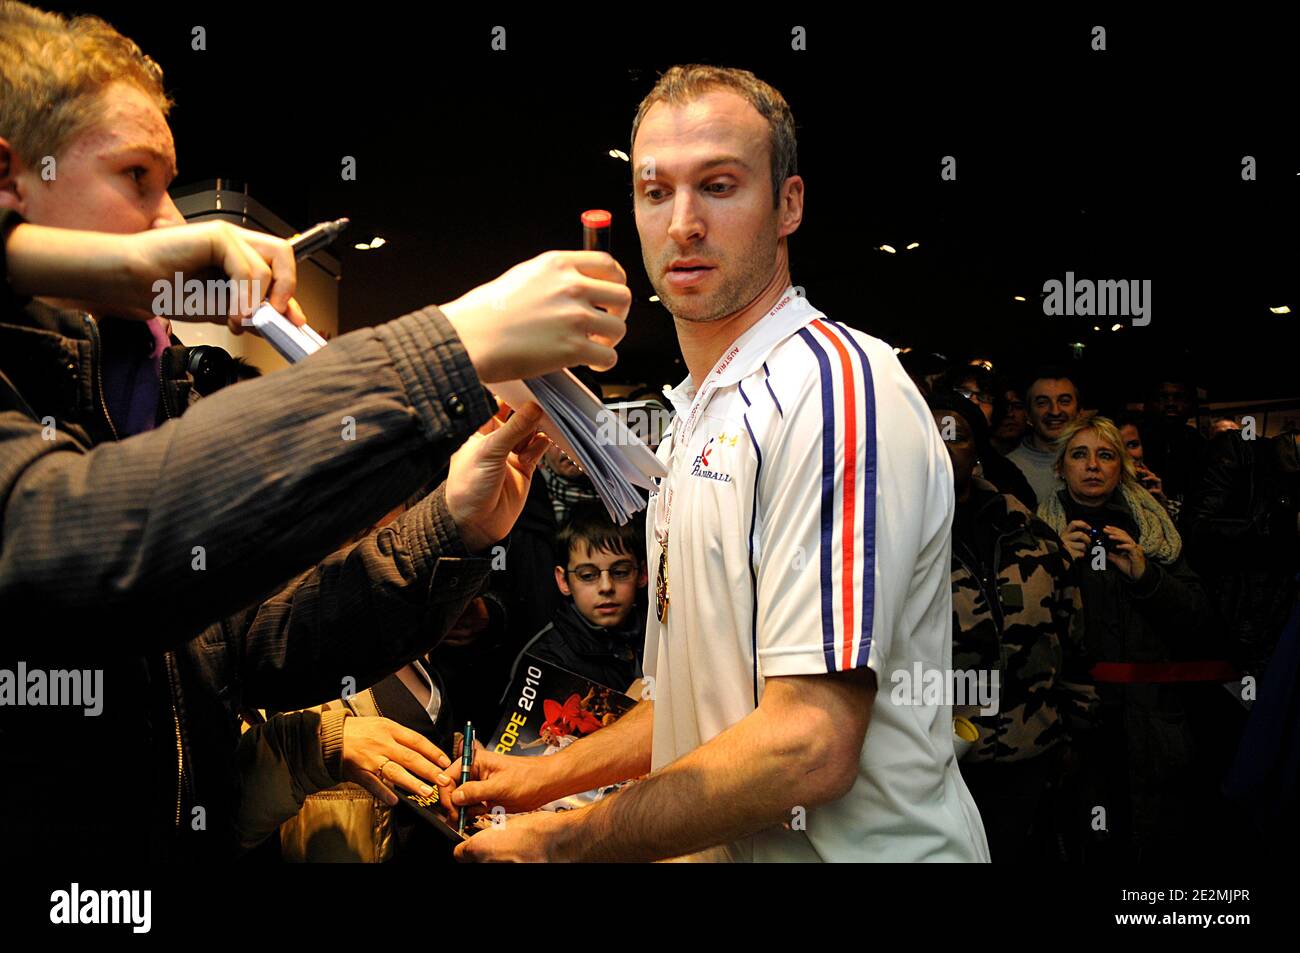 France's handball player goal keeper Thierry Omeyer during a autographs  session and press conference at Adidas Store on on the Champs Elysees  avenue in Paris, France on February 1, 2010 after winning